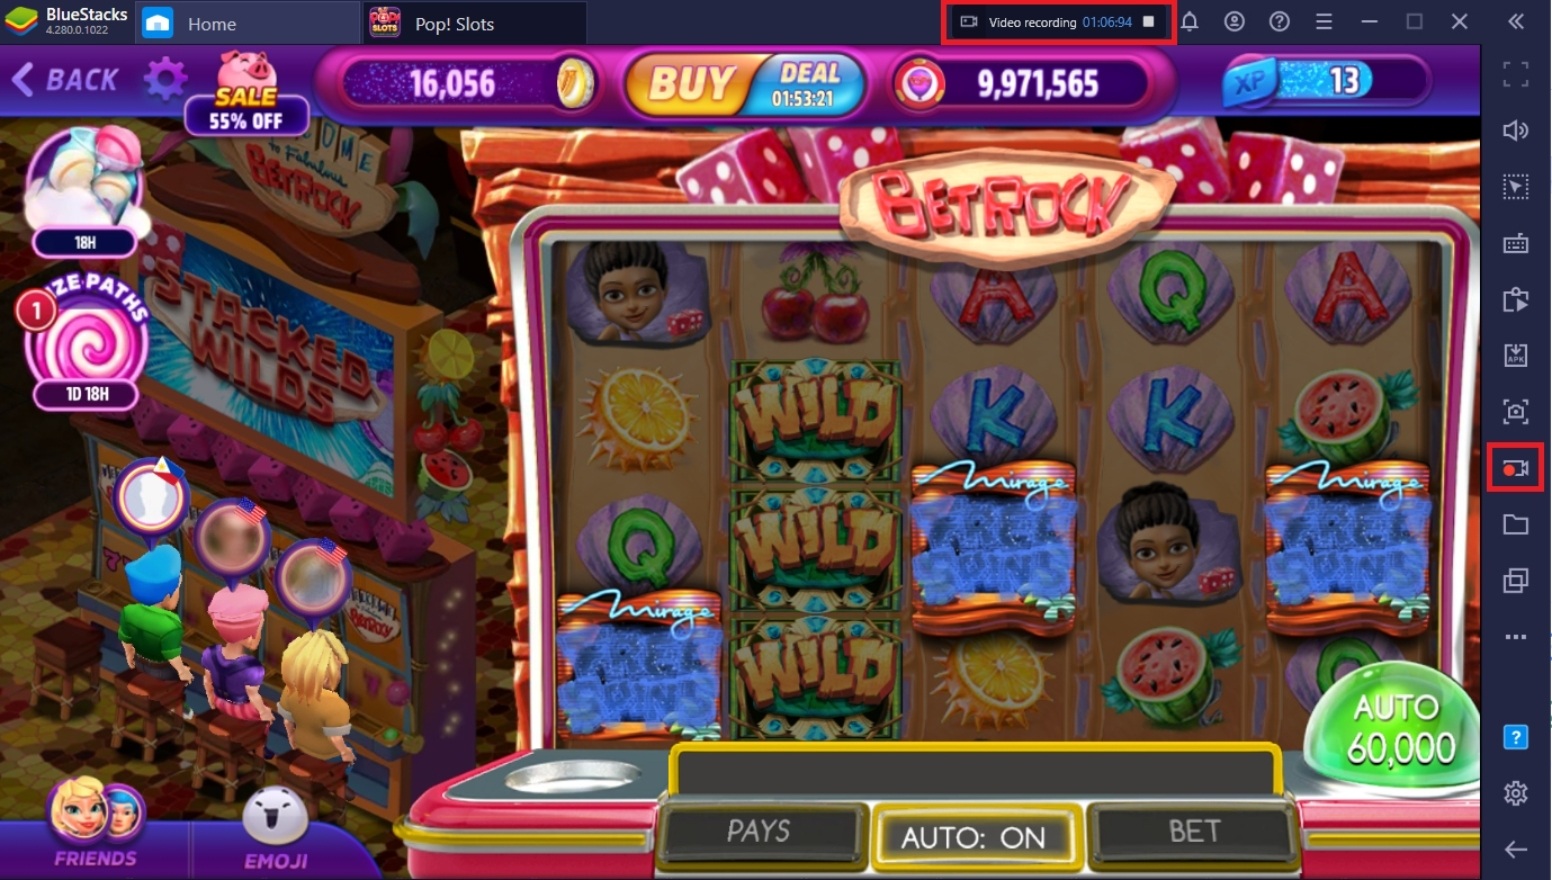 How to Play POP! Slots Vegas Casino Games on PC with BlueStacks